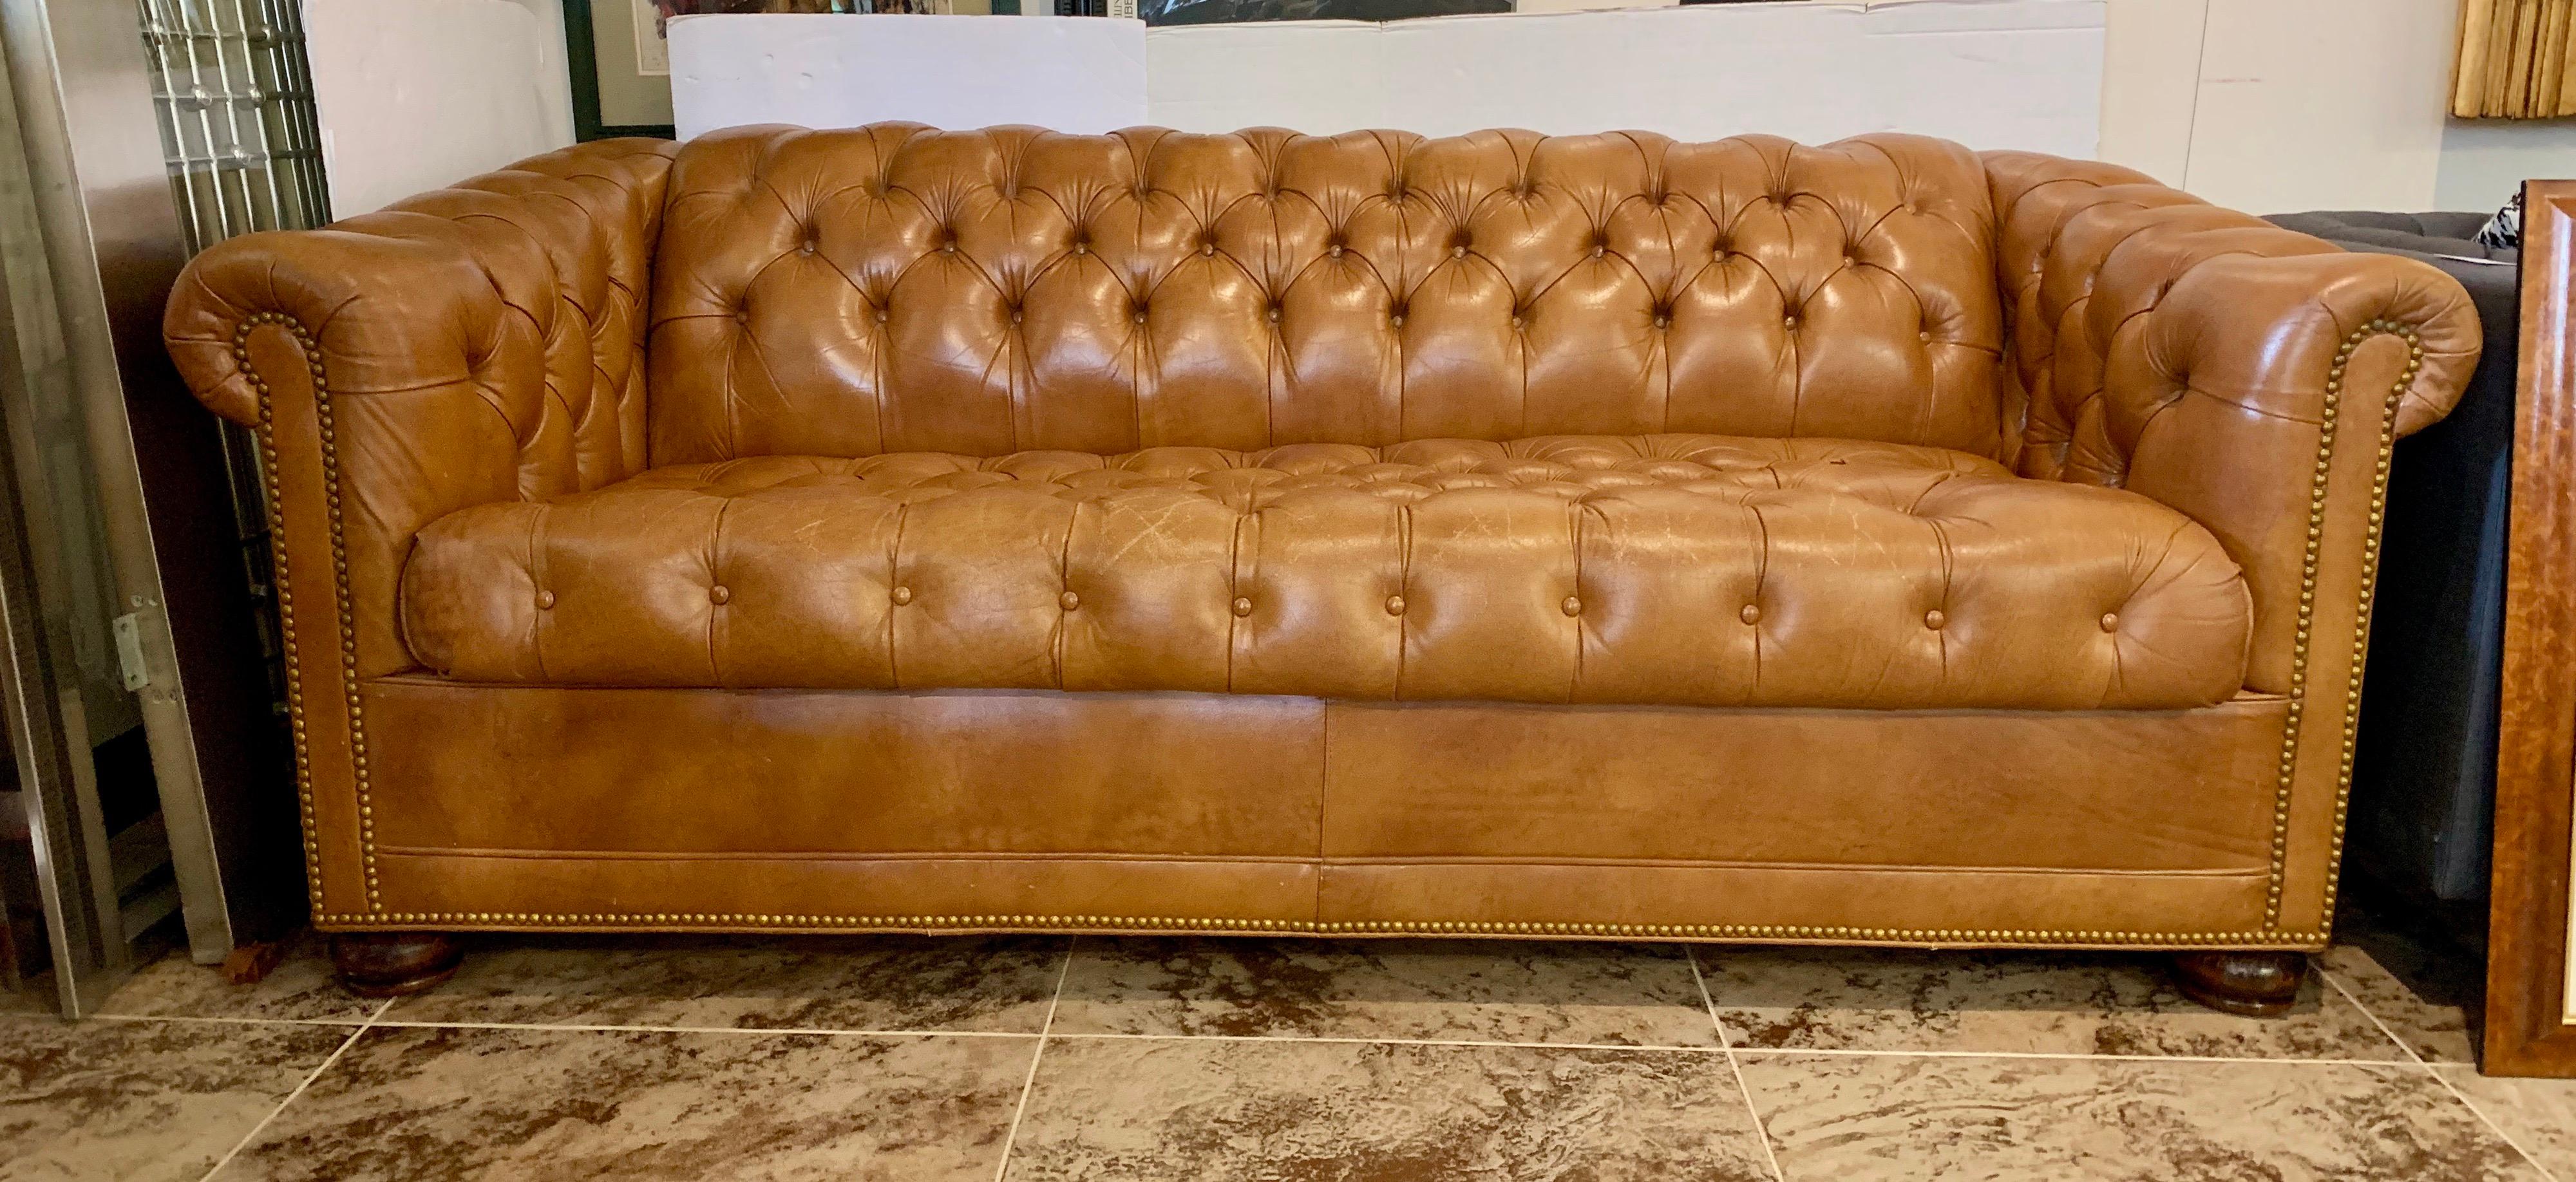 Magnificent caramel leather chesterfield sleeper sofa with nailhead detail and tufted leather throughout. This vintage sofa would compliment a game room, study, or private library. This is a real Chesterfield vintage sofa from England, circa 1960's.